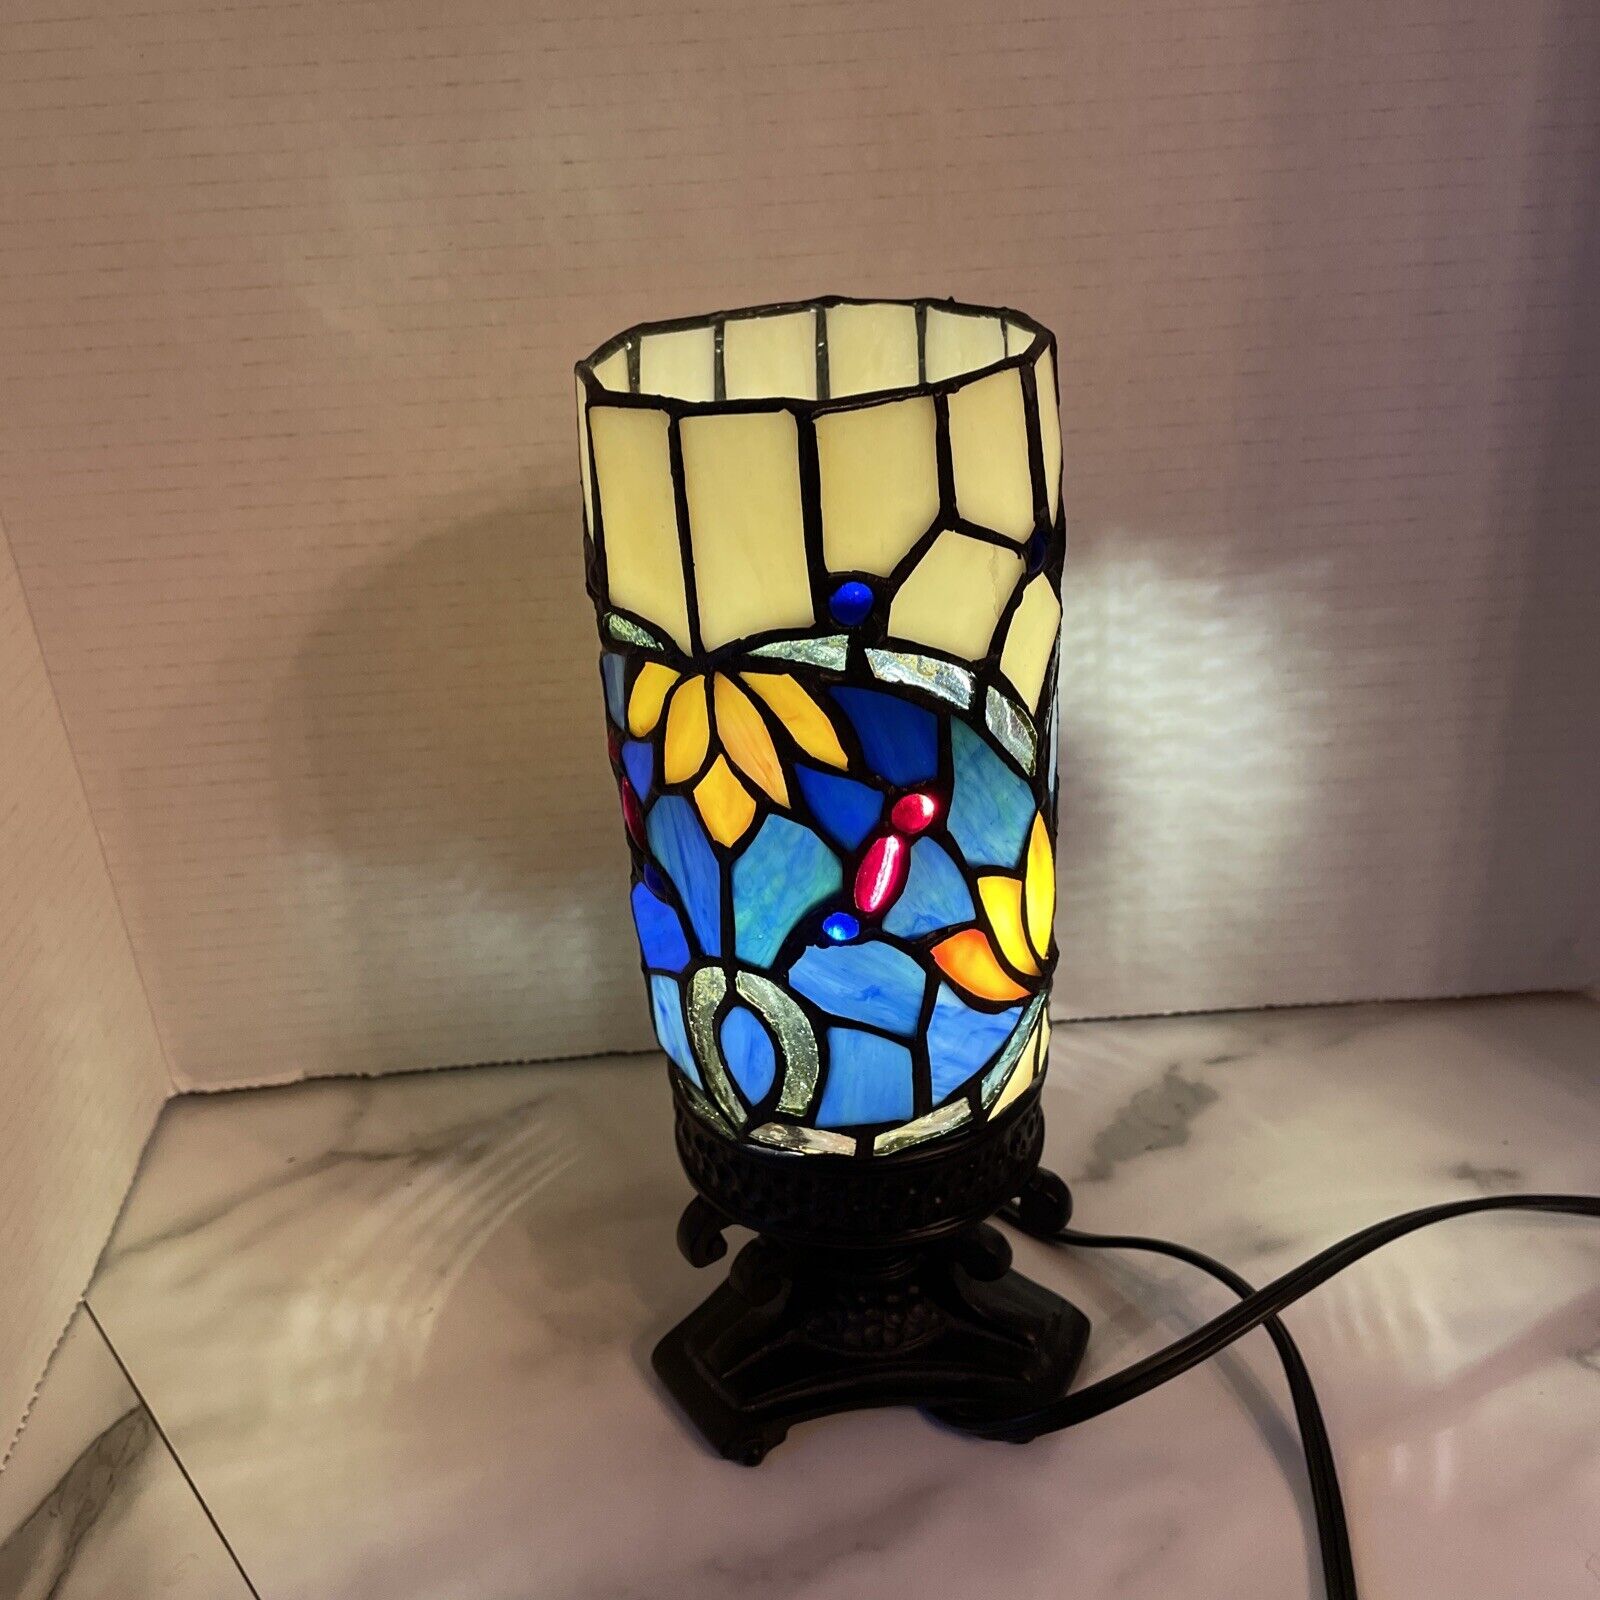 Small Tiffany Table Lamp Blue Yellow Floral Design  Stained Glass  10.5x 4